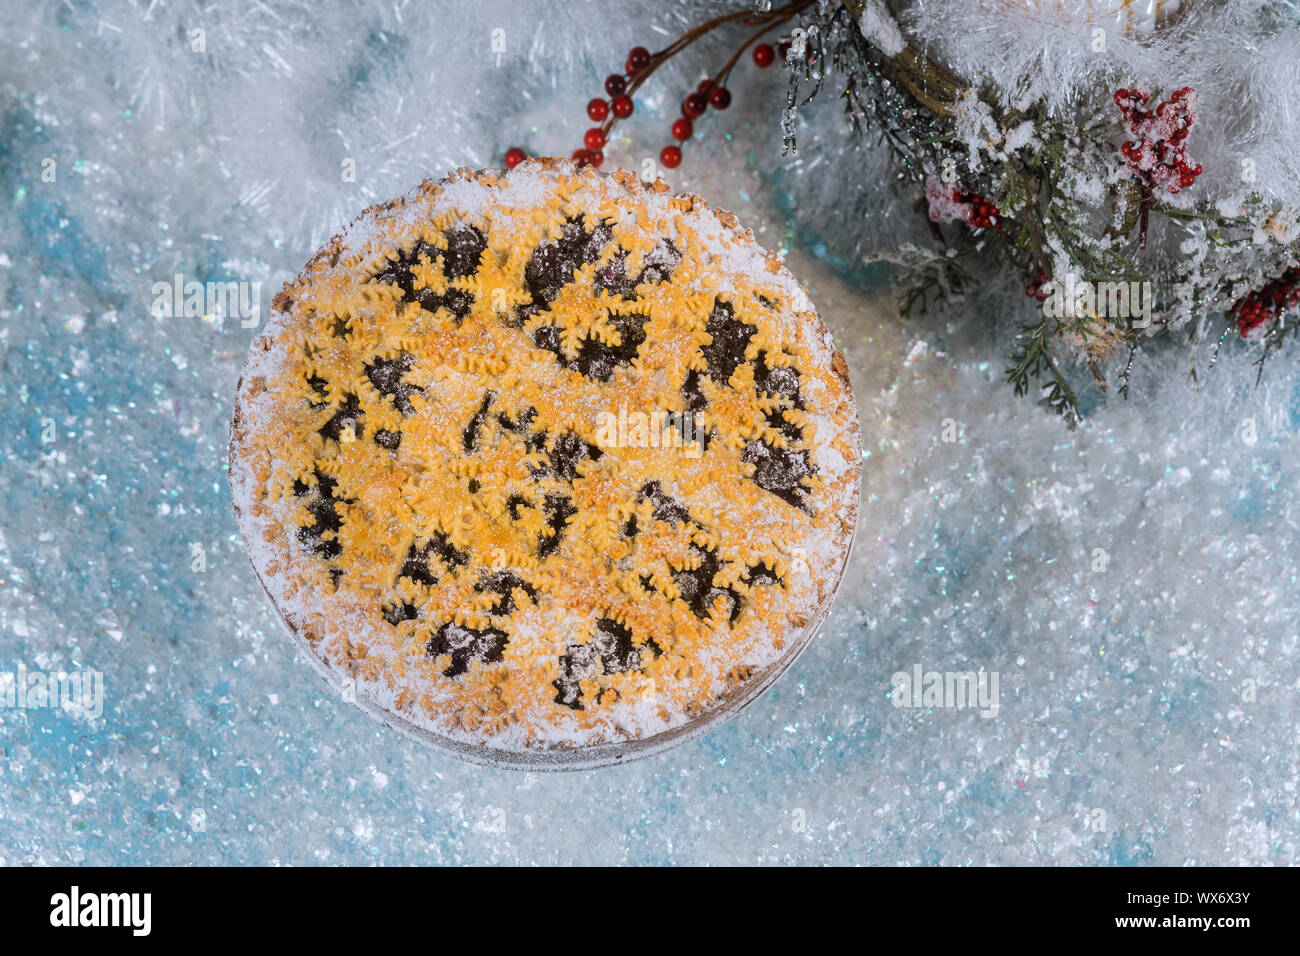 Christmas pie and decorations on sparkle snow background. Stock Photo